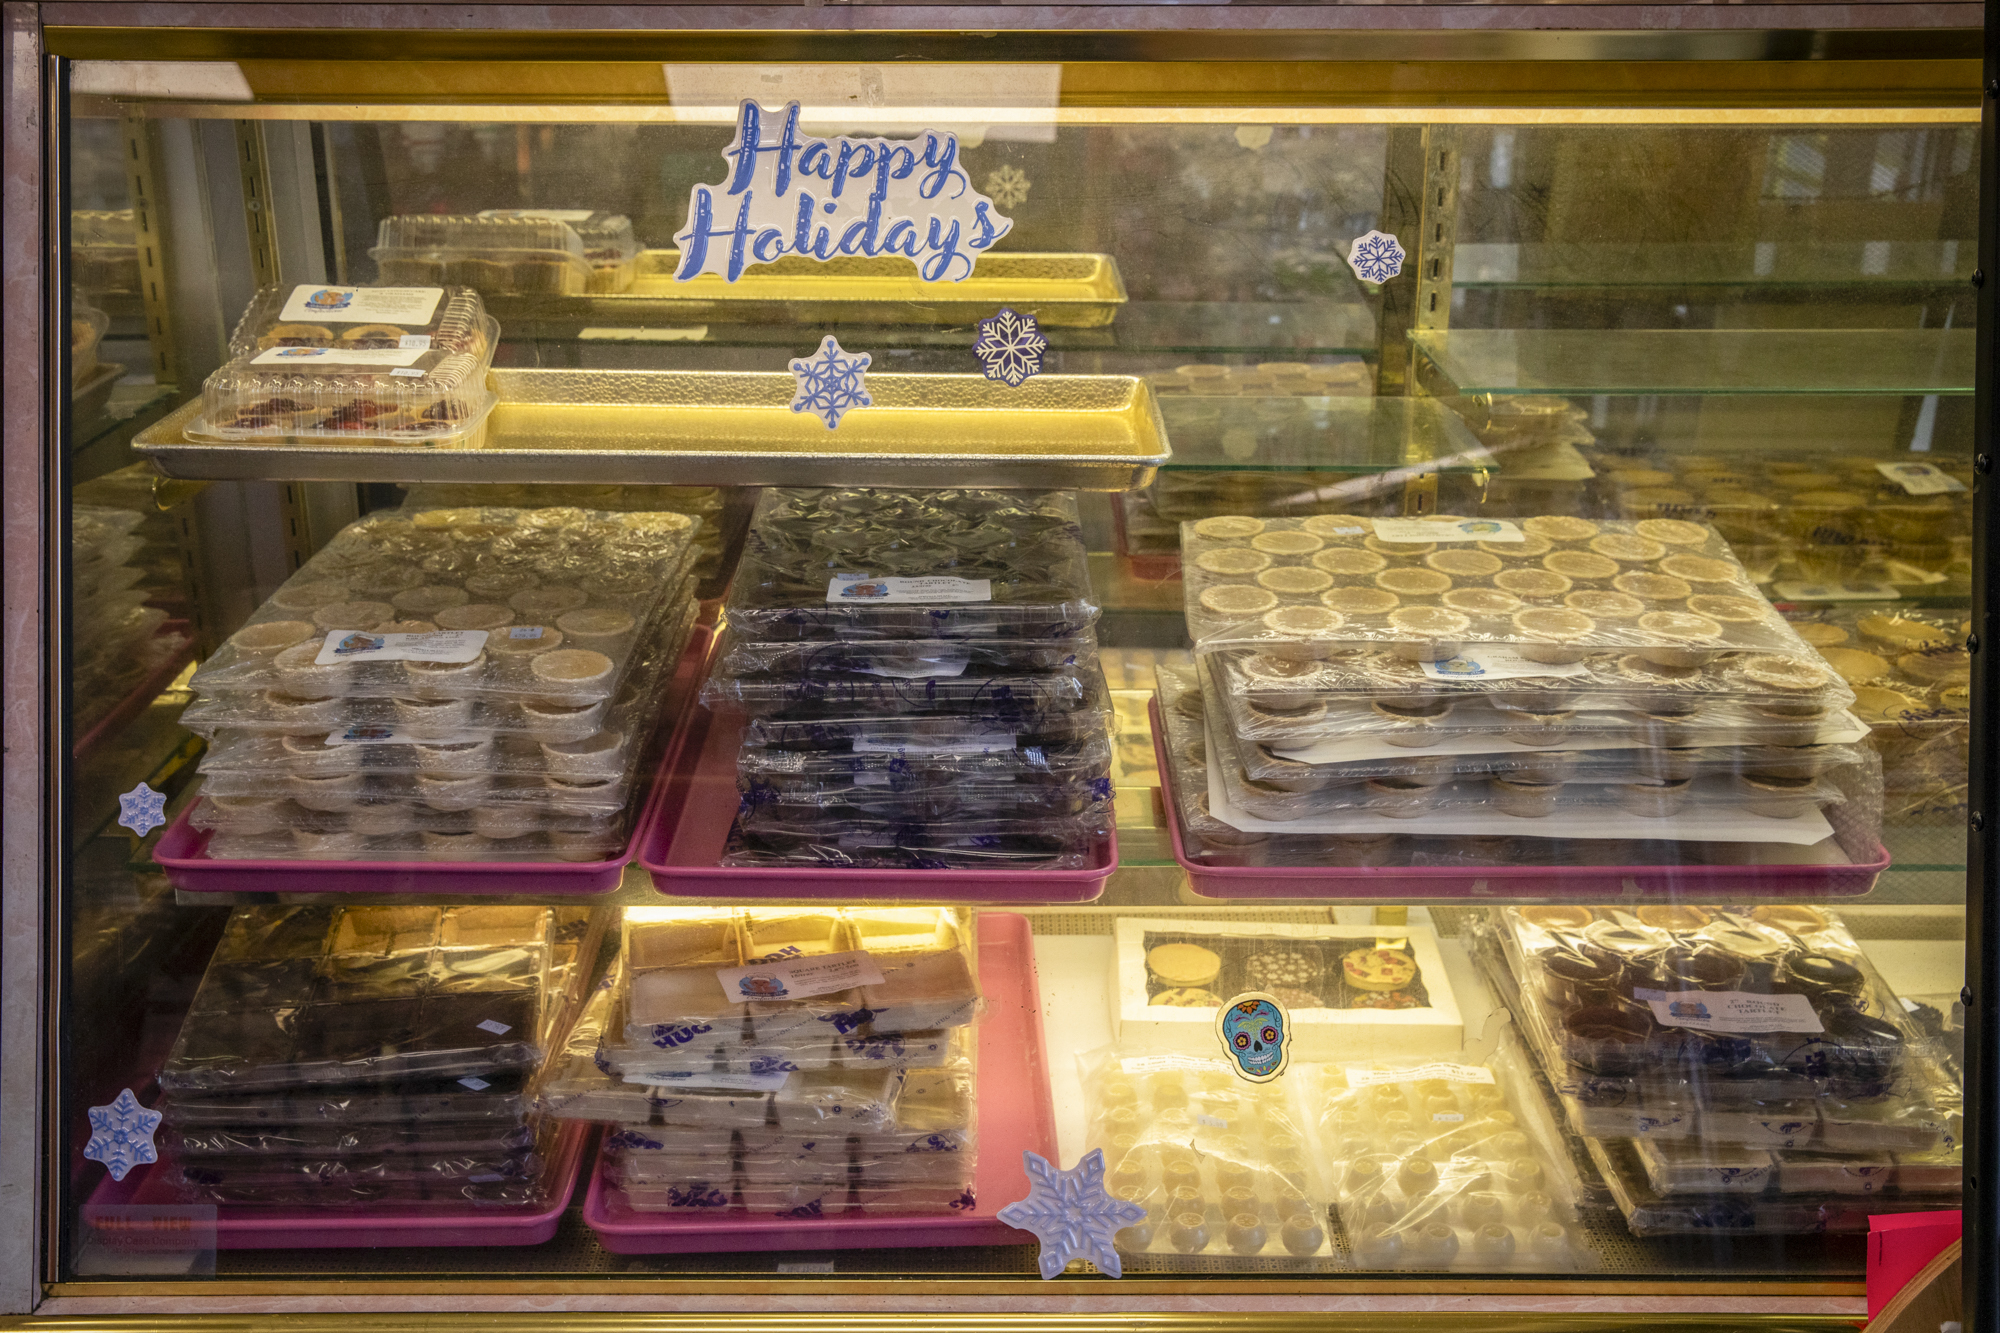 Display case in a cookie decorating and baking supply shop. A sticker on the glass reads, "Happy Holidays."